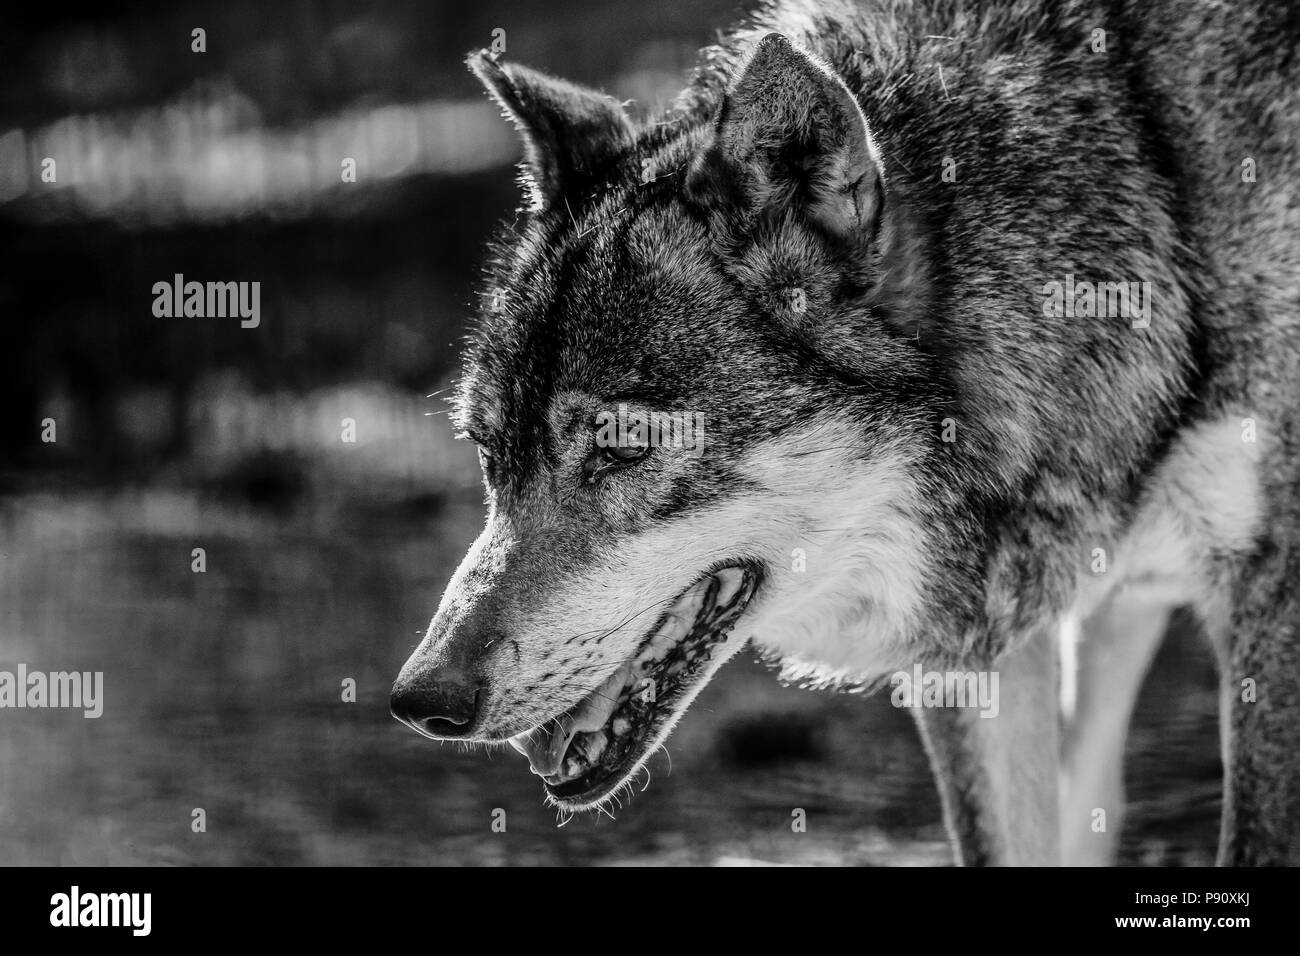 Black and white portrait of a wolf Stock Photo